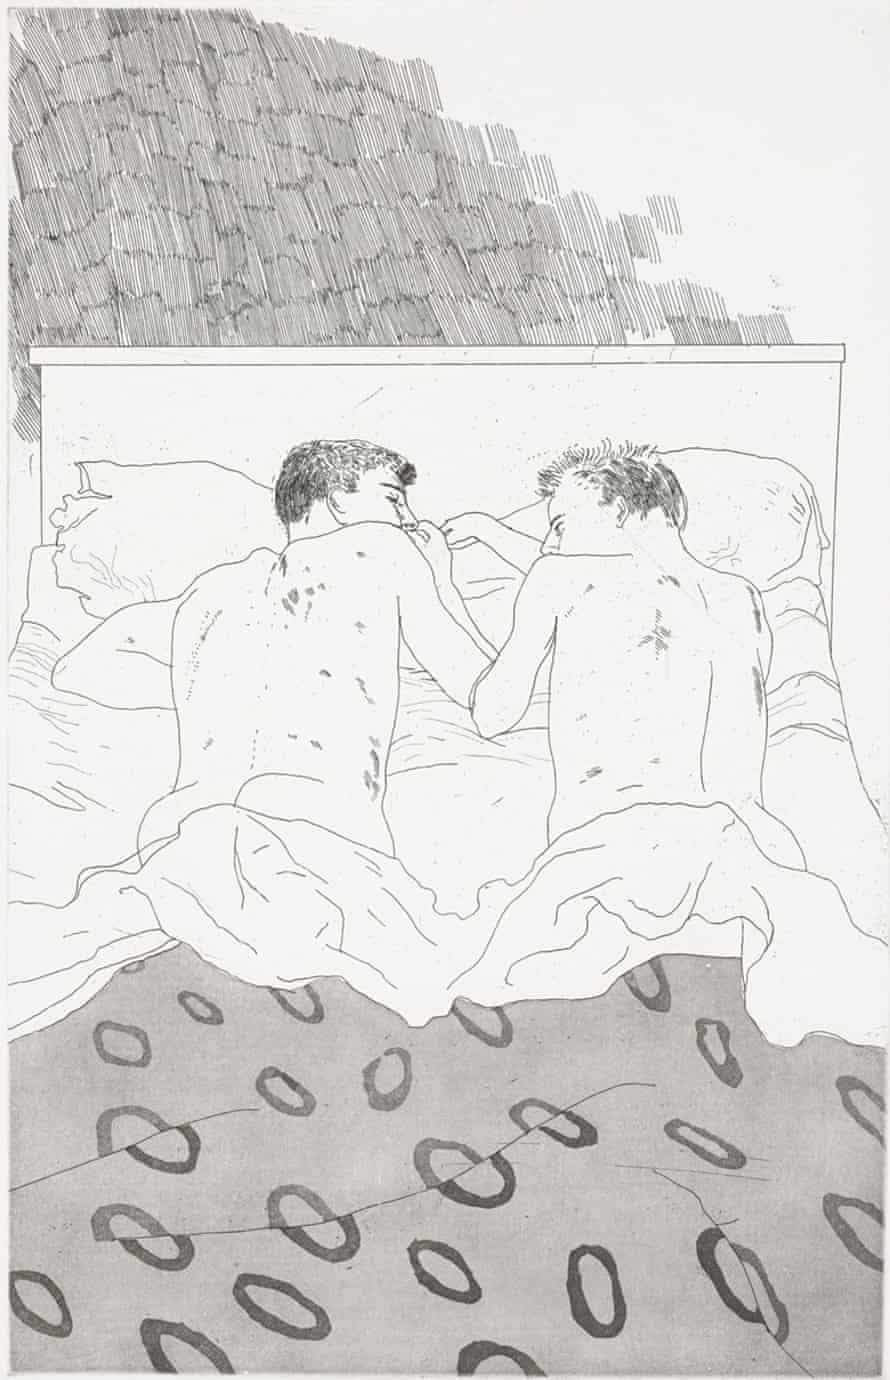 David Hockney&#39;s Two Boys Aged 23 or 24: sensuality and history | David  Hockney | The Guardian